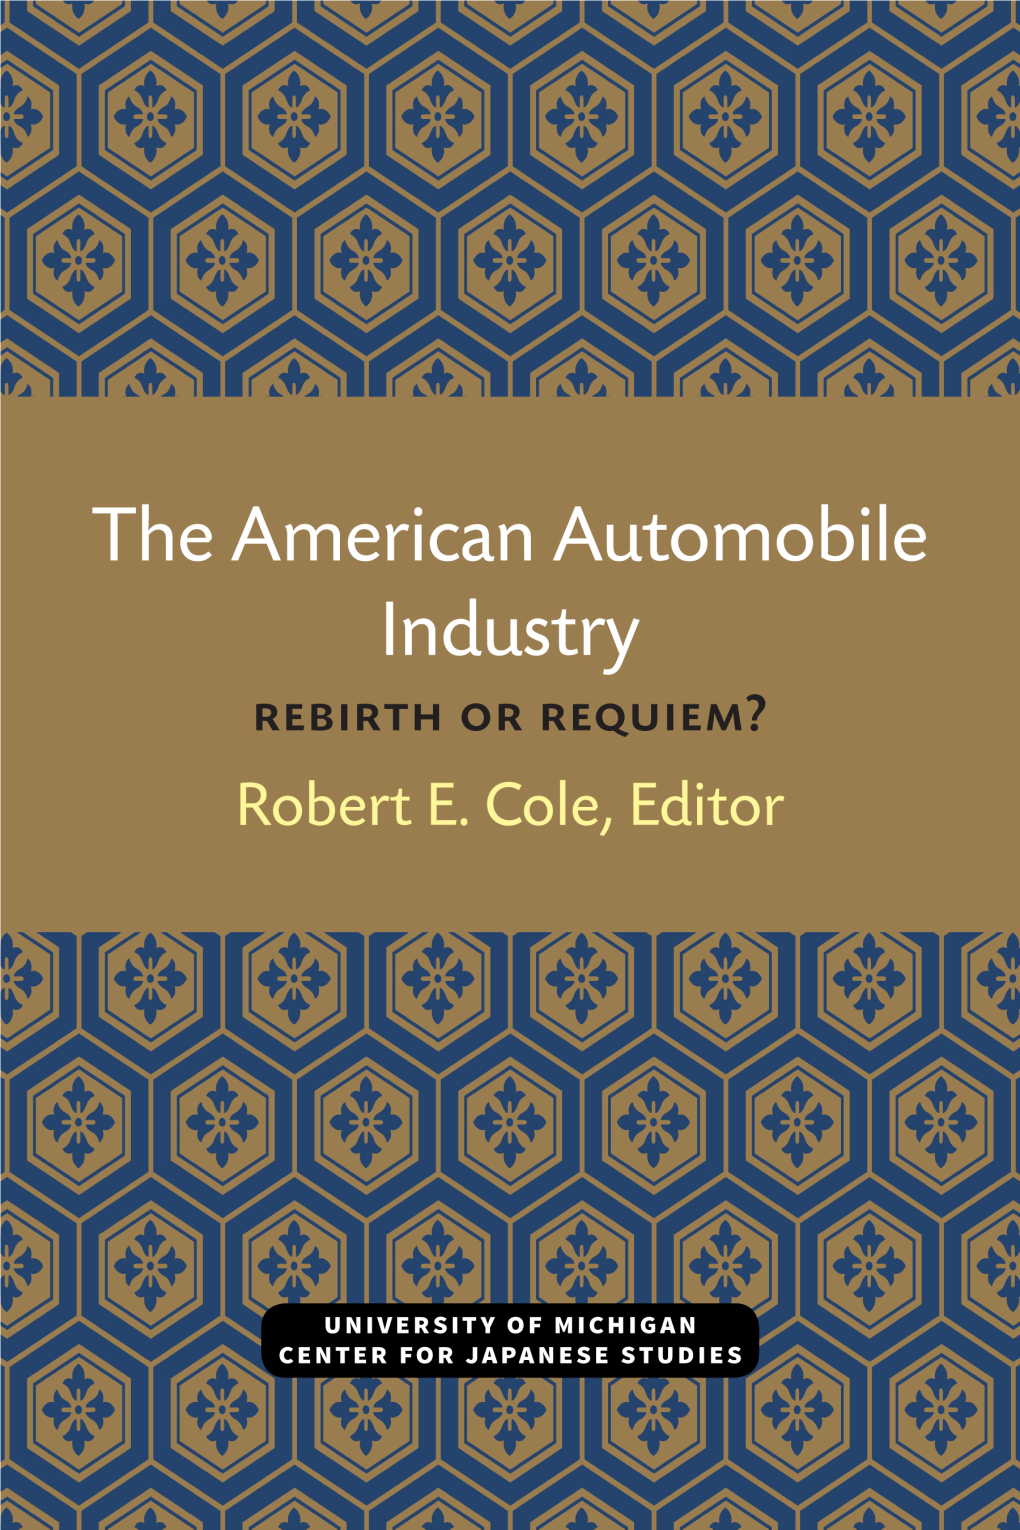 The American Automobile Industry: Rebirth Or Requiem, Edited by Robert E